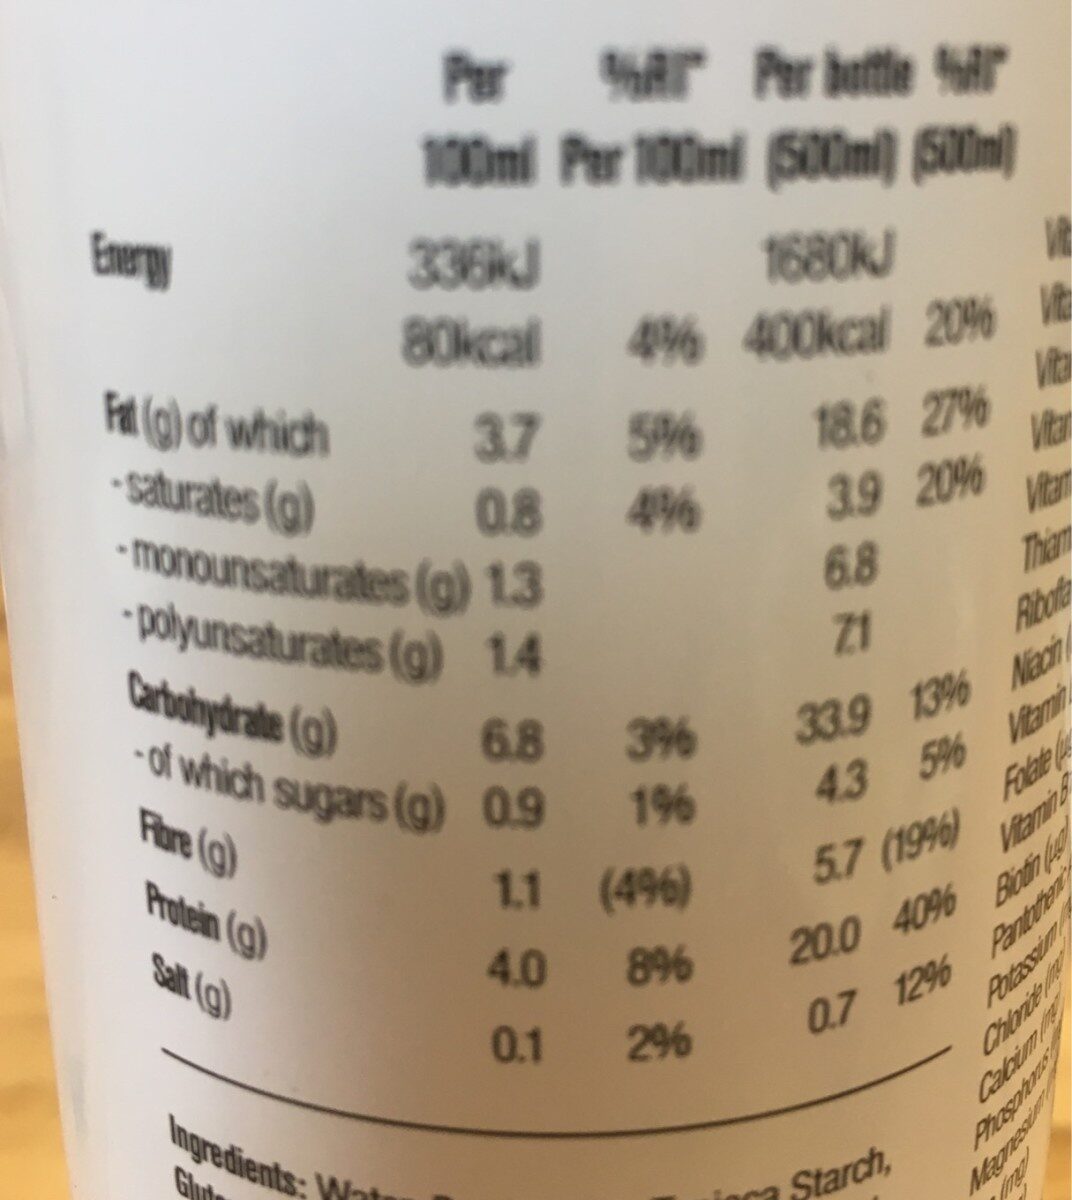 Ready-to-drink v1.0: Vanilla Flavour - Nutrition facts - en